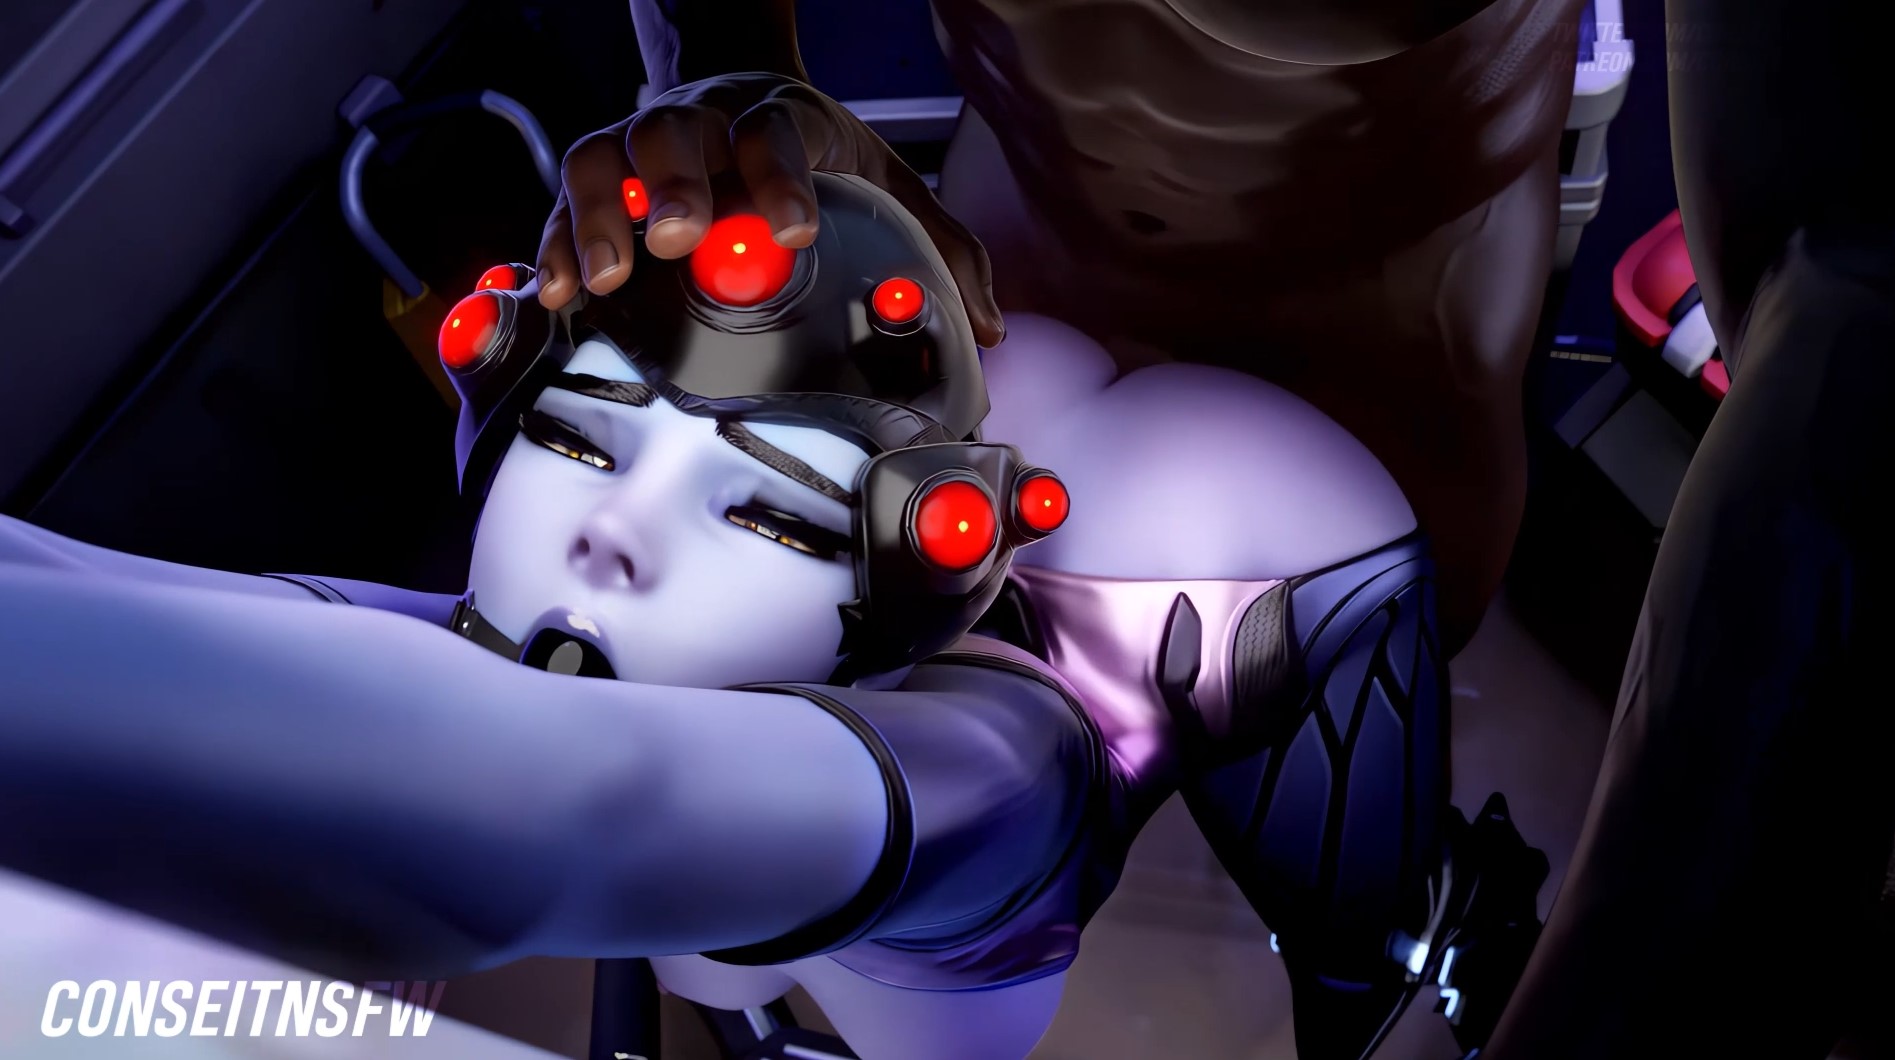 Dommy Widowmaker Captures Her Target [Blacked][Conseitnsfw]